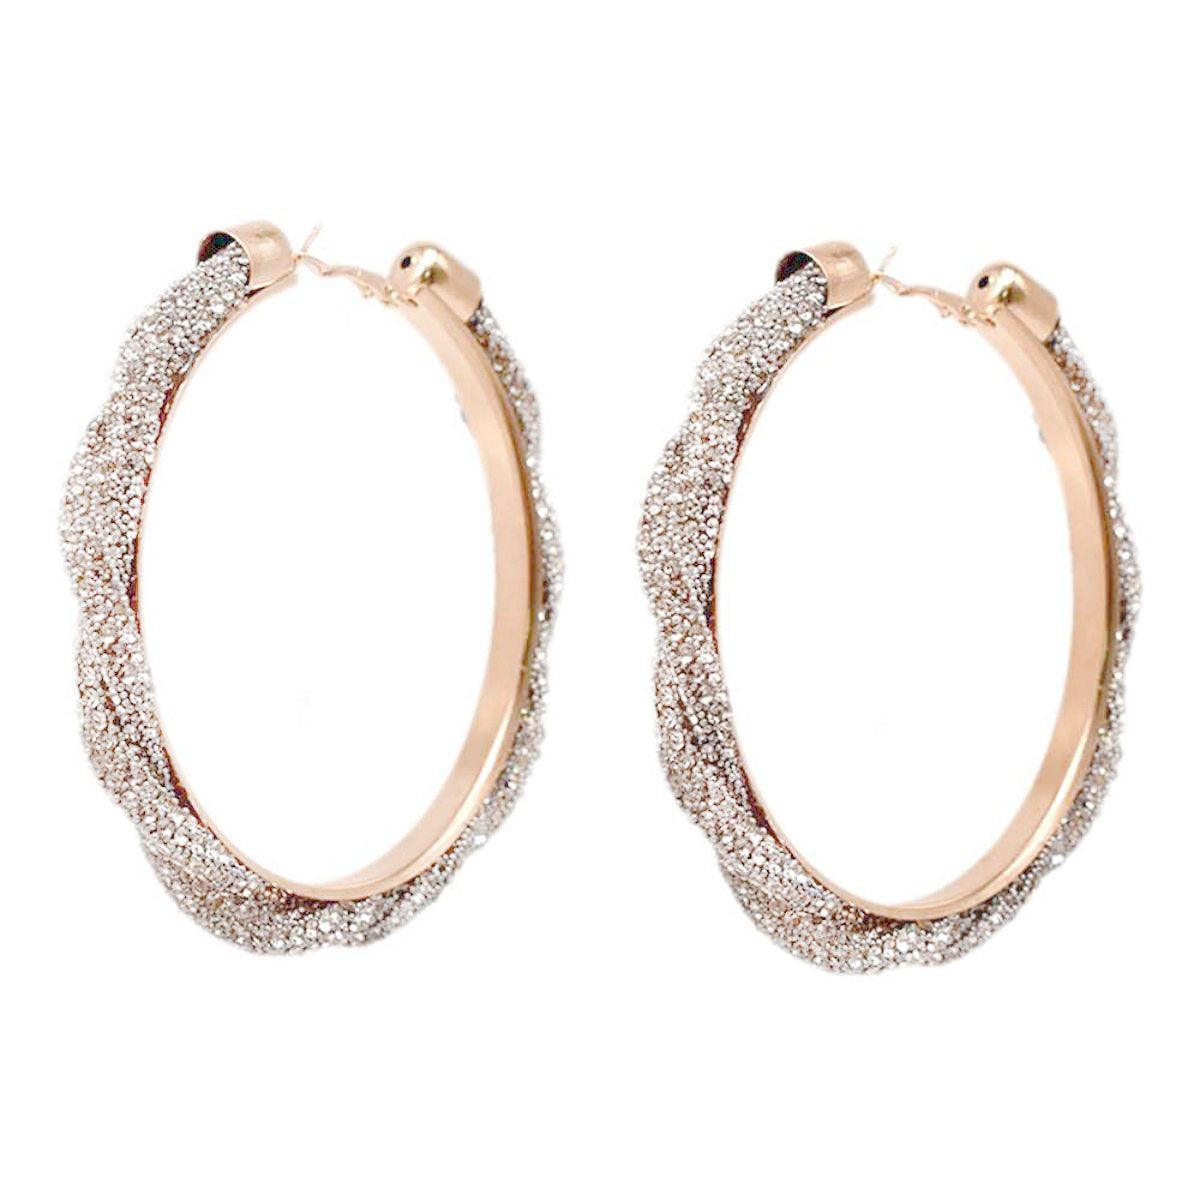 Dazzle Everyone: Clear Shimmer Hoop Earrings You Need Now!